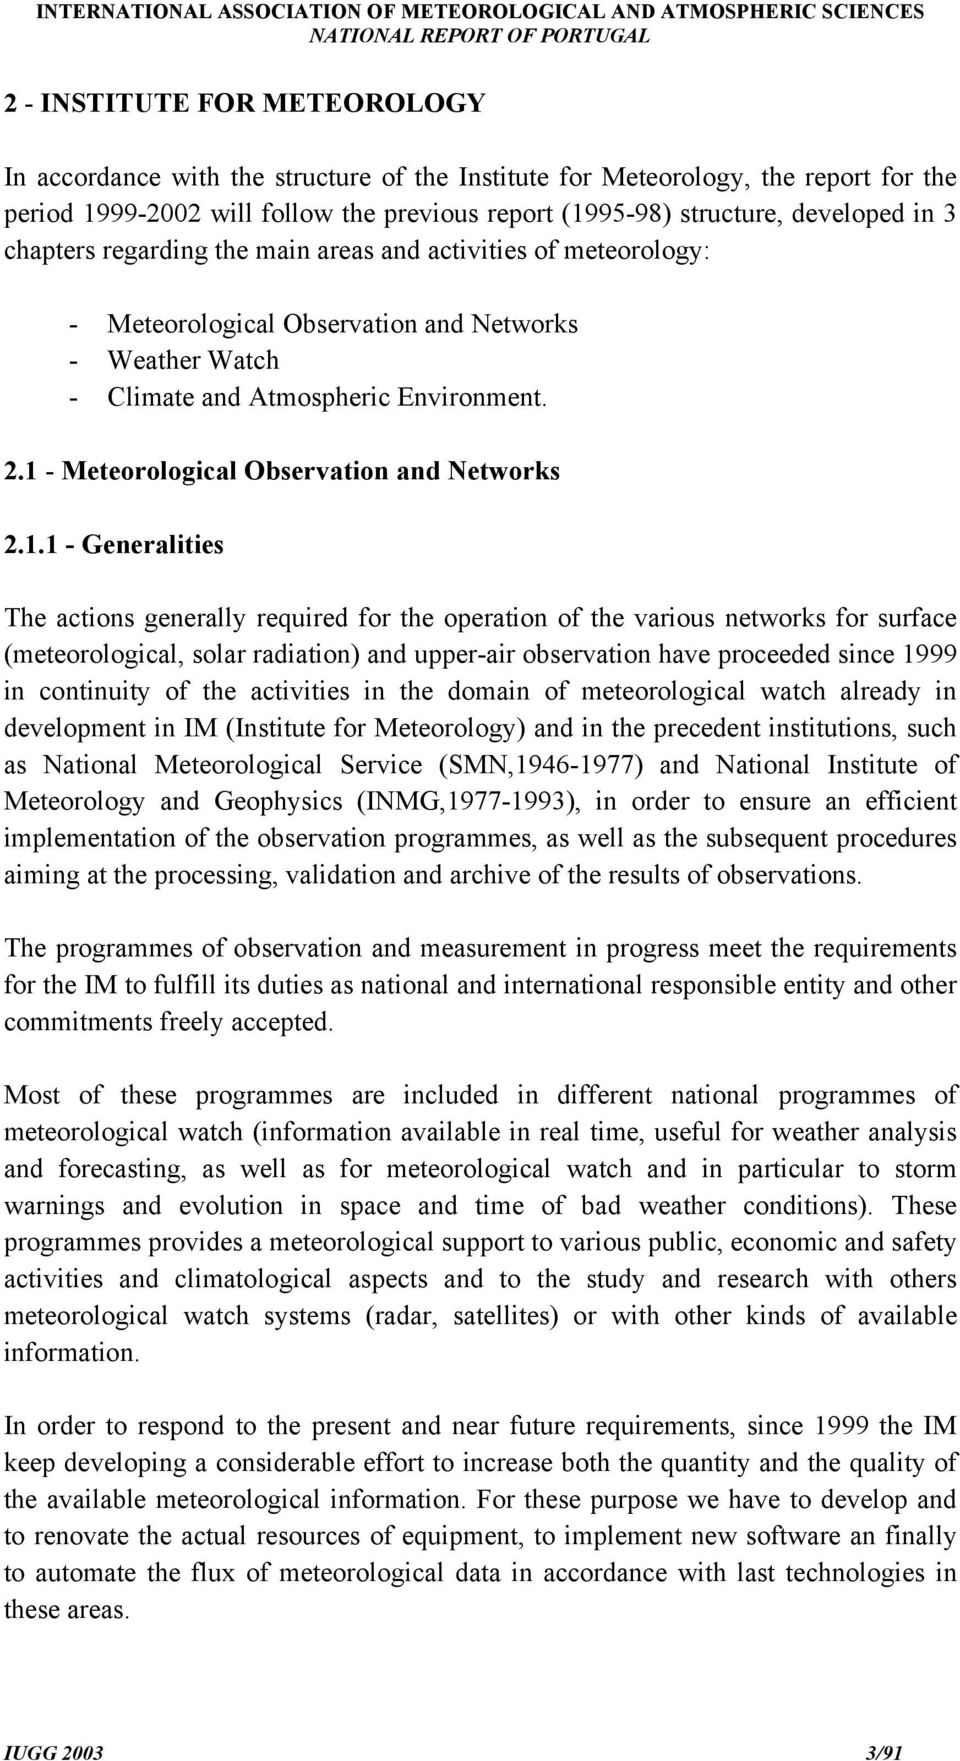 1 - Meteorological Observation and Networks 2.1.1 - Generalities The actions generally required for the operation of the various networks for surface (meteorological, solar radiation) and upper-air